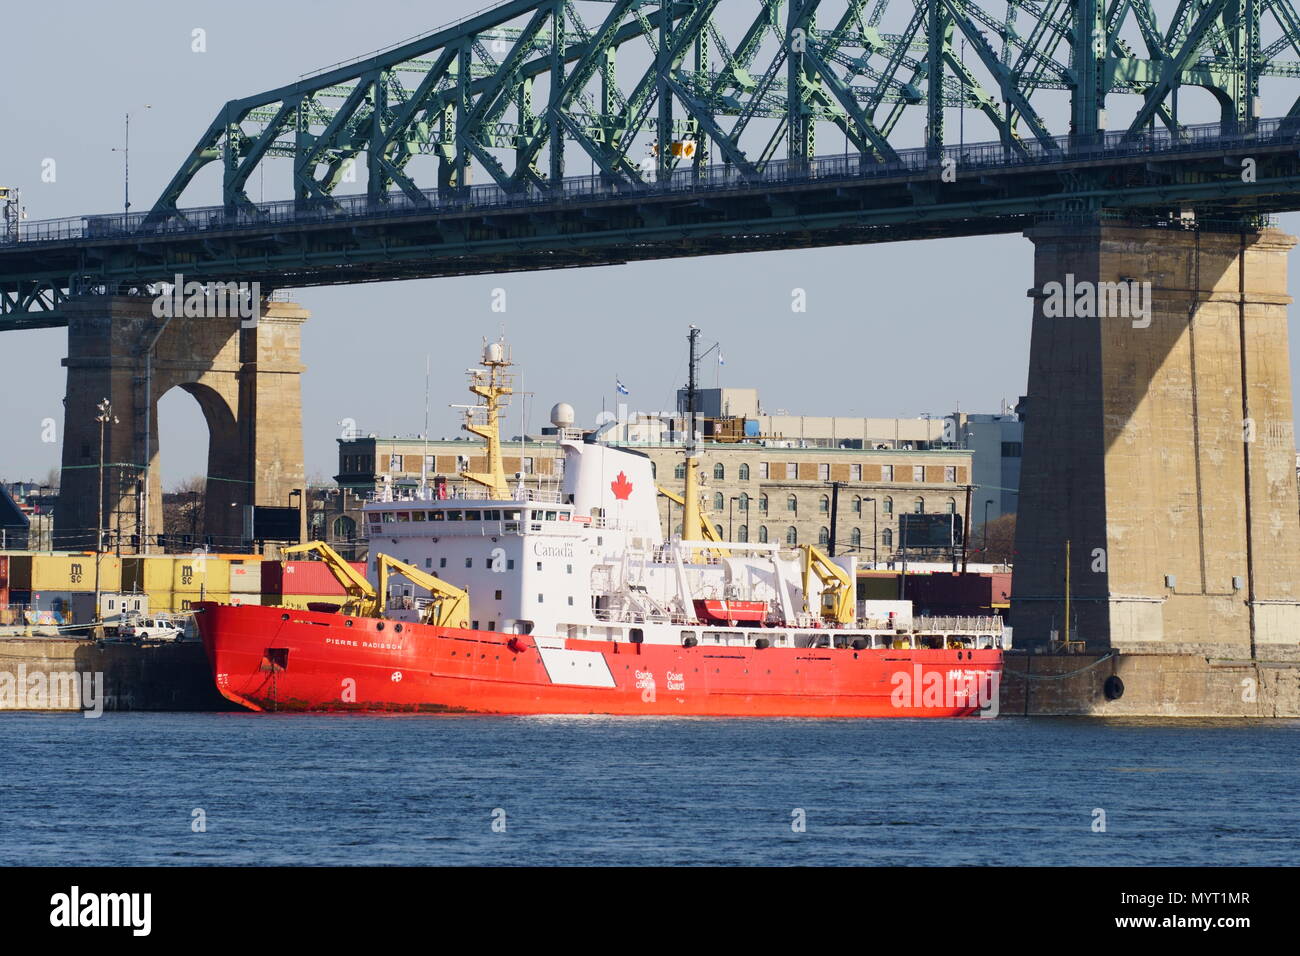 Montreal, QC / Canada - June 7th, 2018 : Ship of the Canadian Coast Guard located on the Saint-Lawrence River in the port of Montreal, Canada. Stock Photo